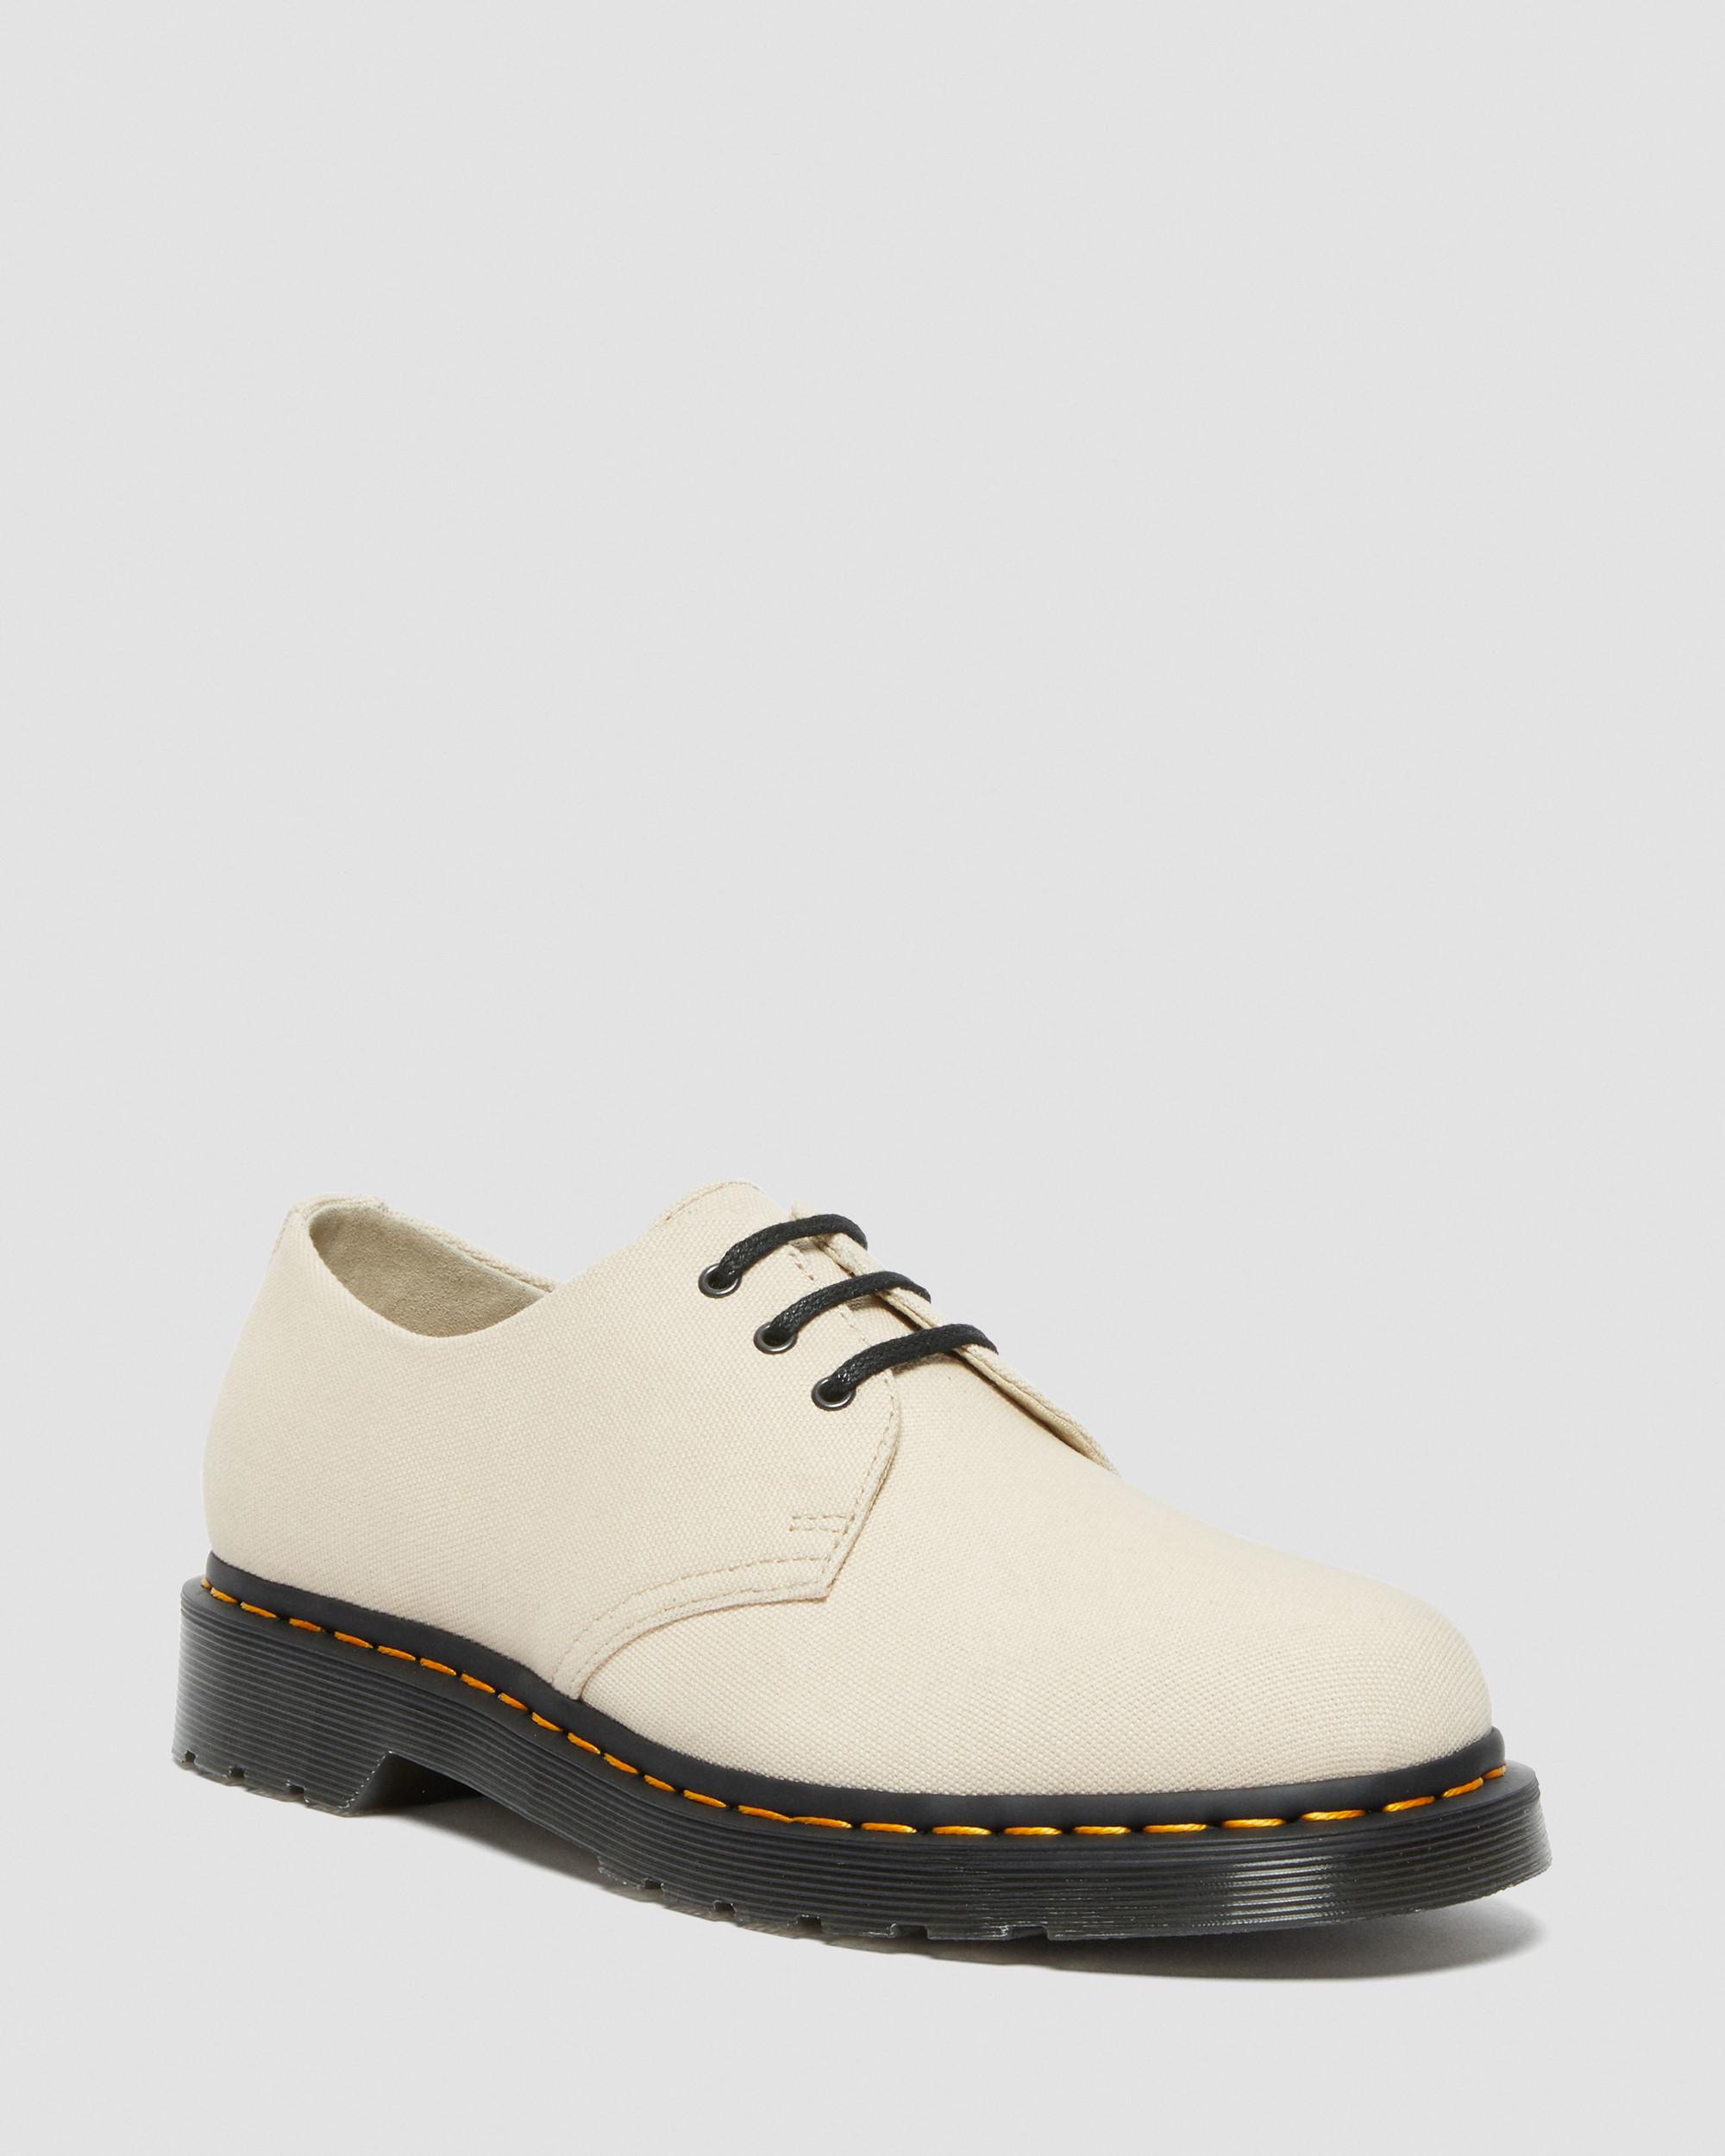 1461 Canvas Oxford Shoes in Sand | Dr. Martens